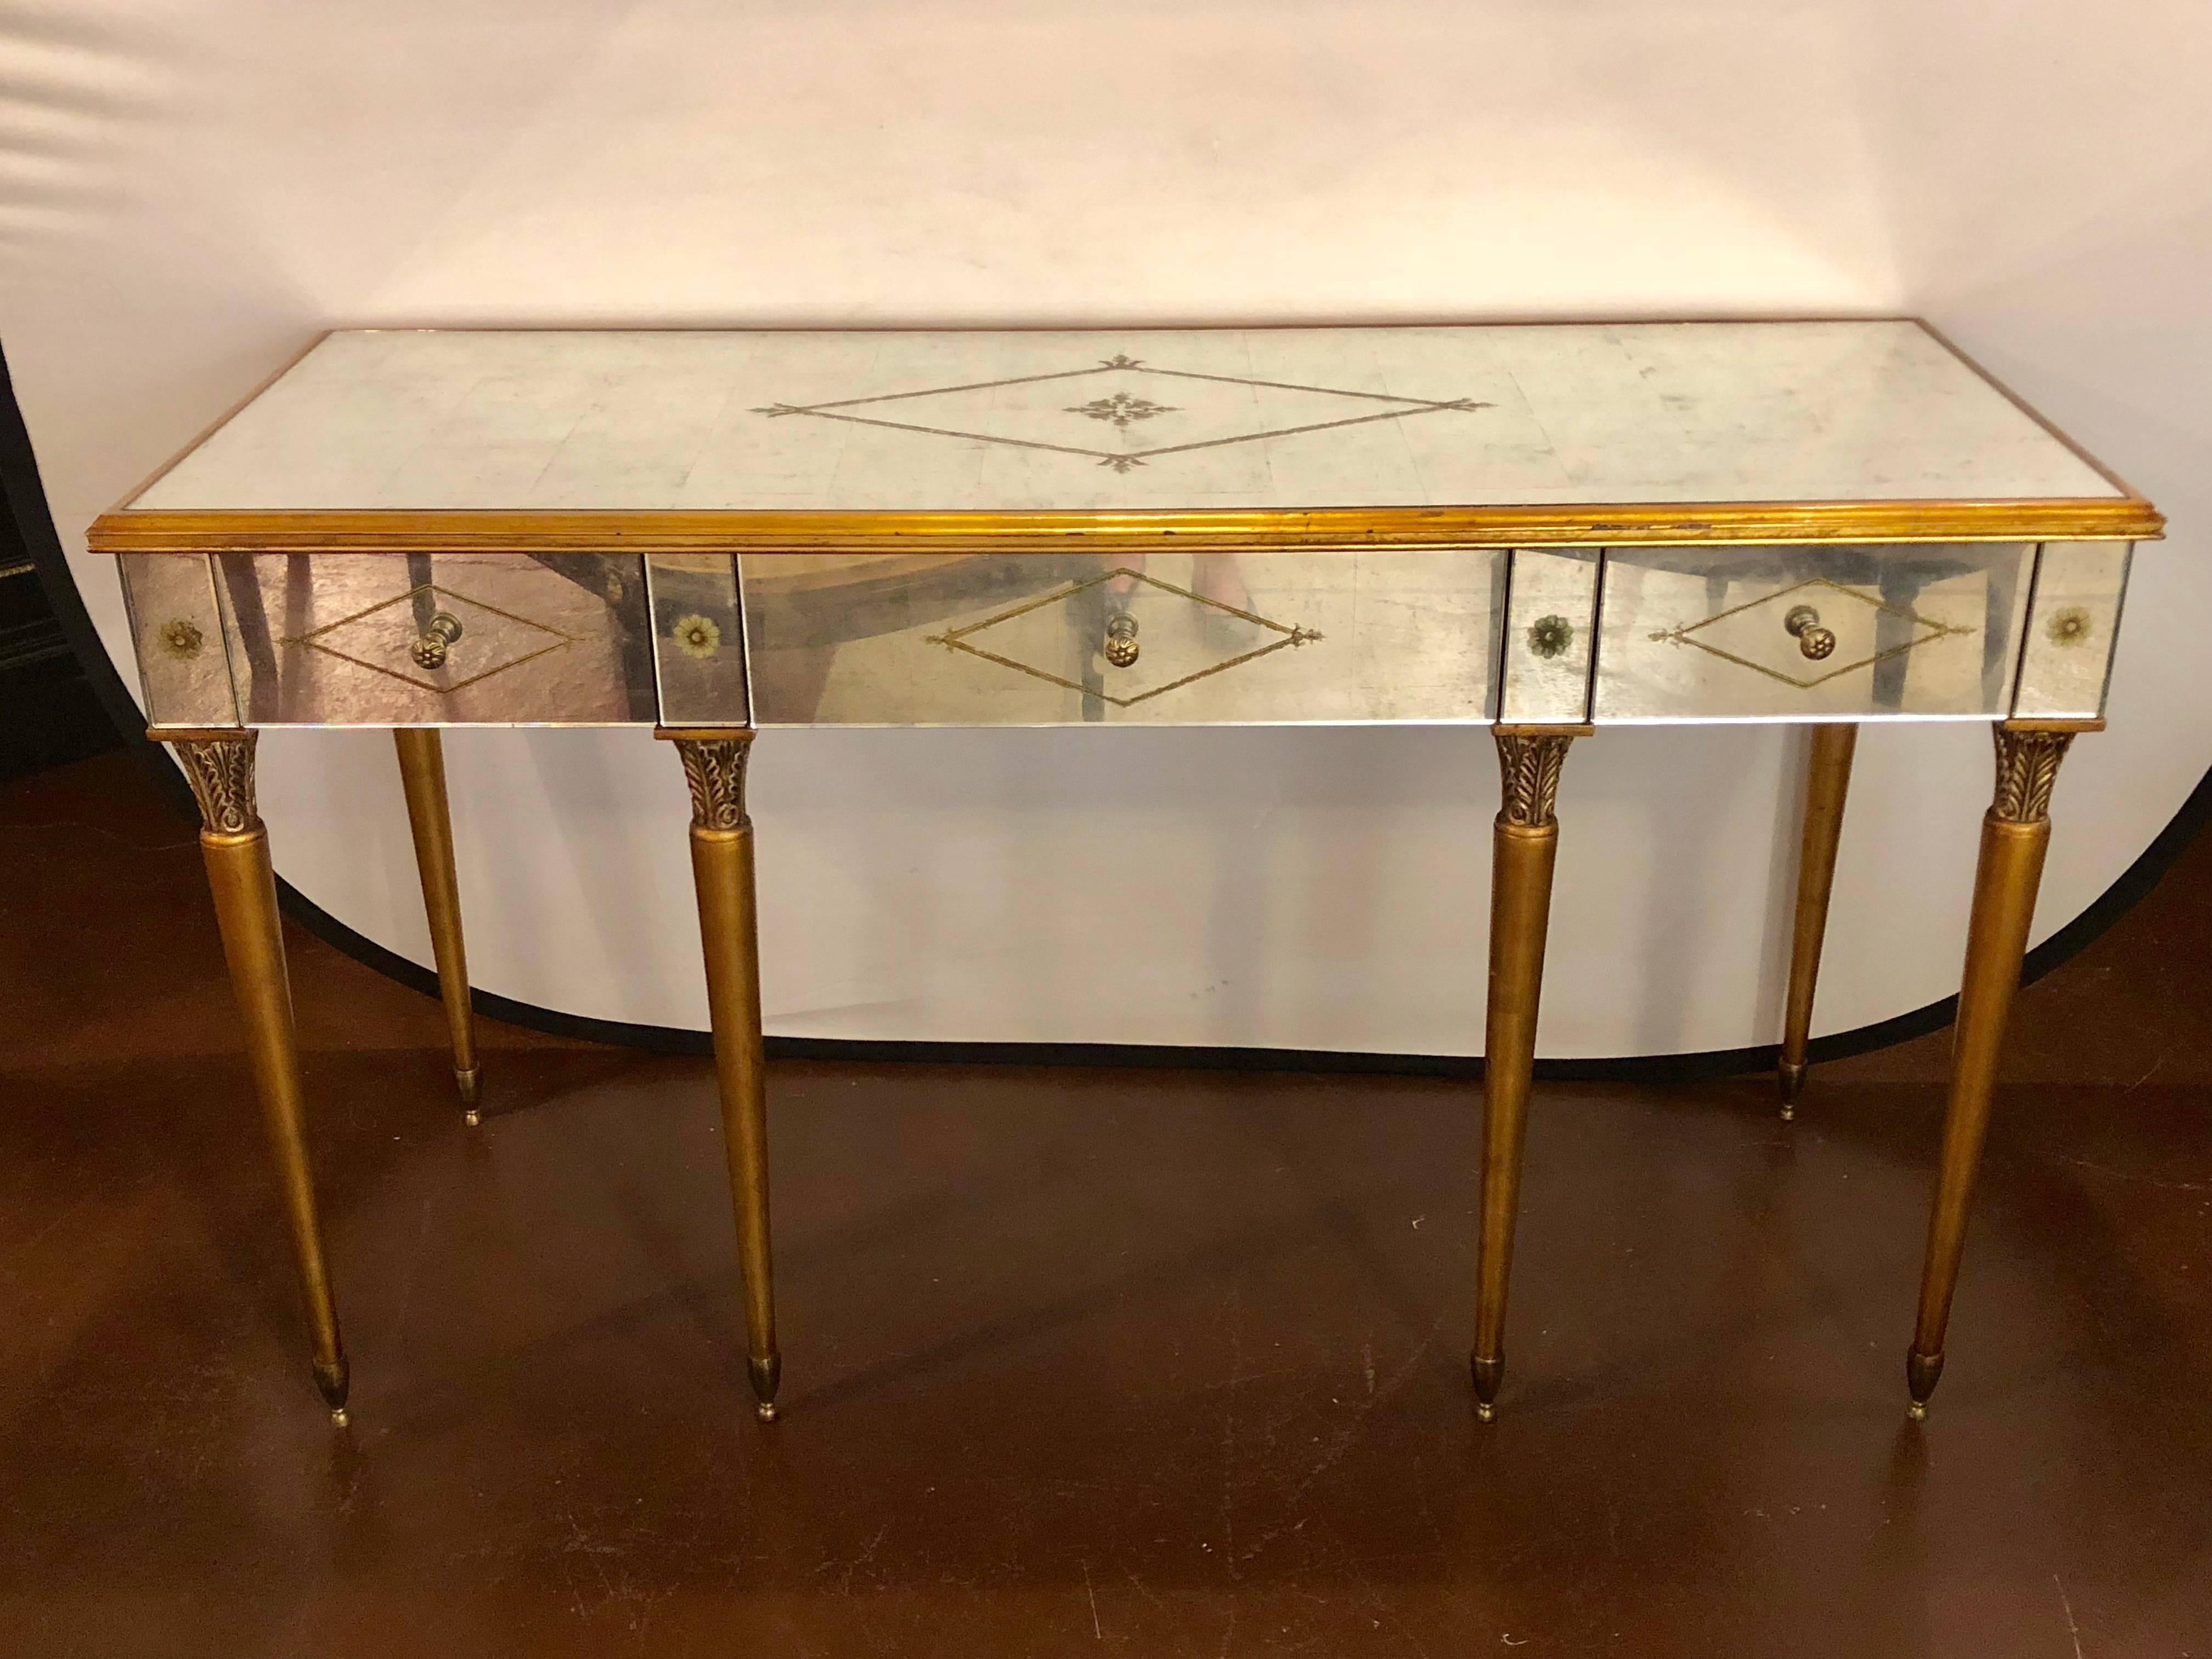 Hollywood Regency style mirrored desk or vanity églomisé decoration by Heritage. Supported by sleek tapering gilt legs having a center diamond designed églomisé silver gilt drawer flanked by matching side drawers. The mirrored top with gilt diamond